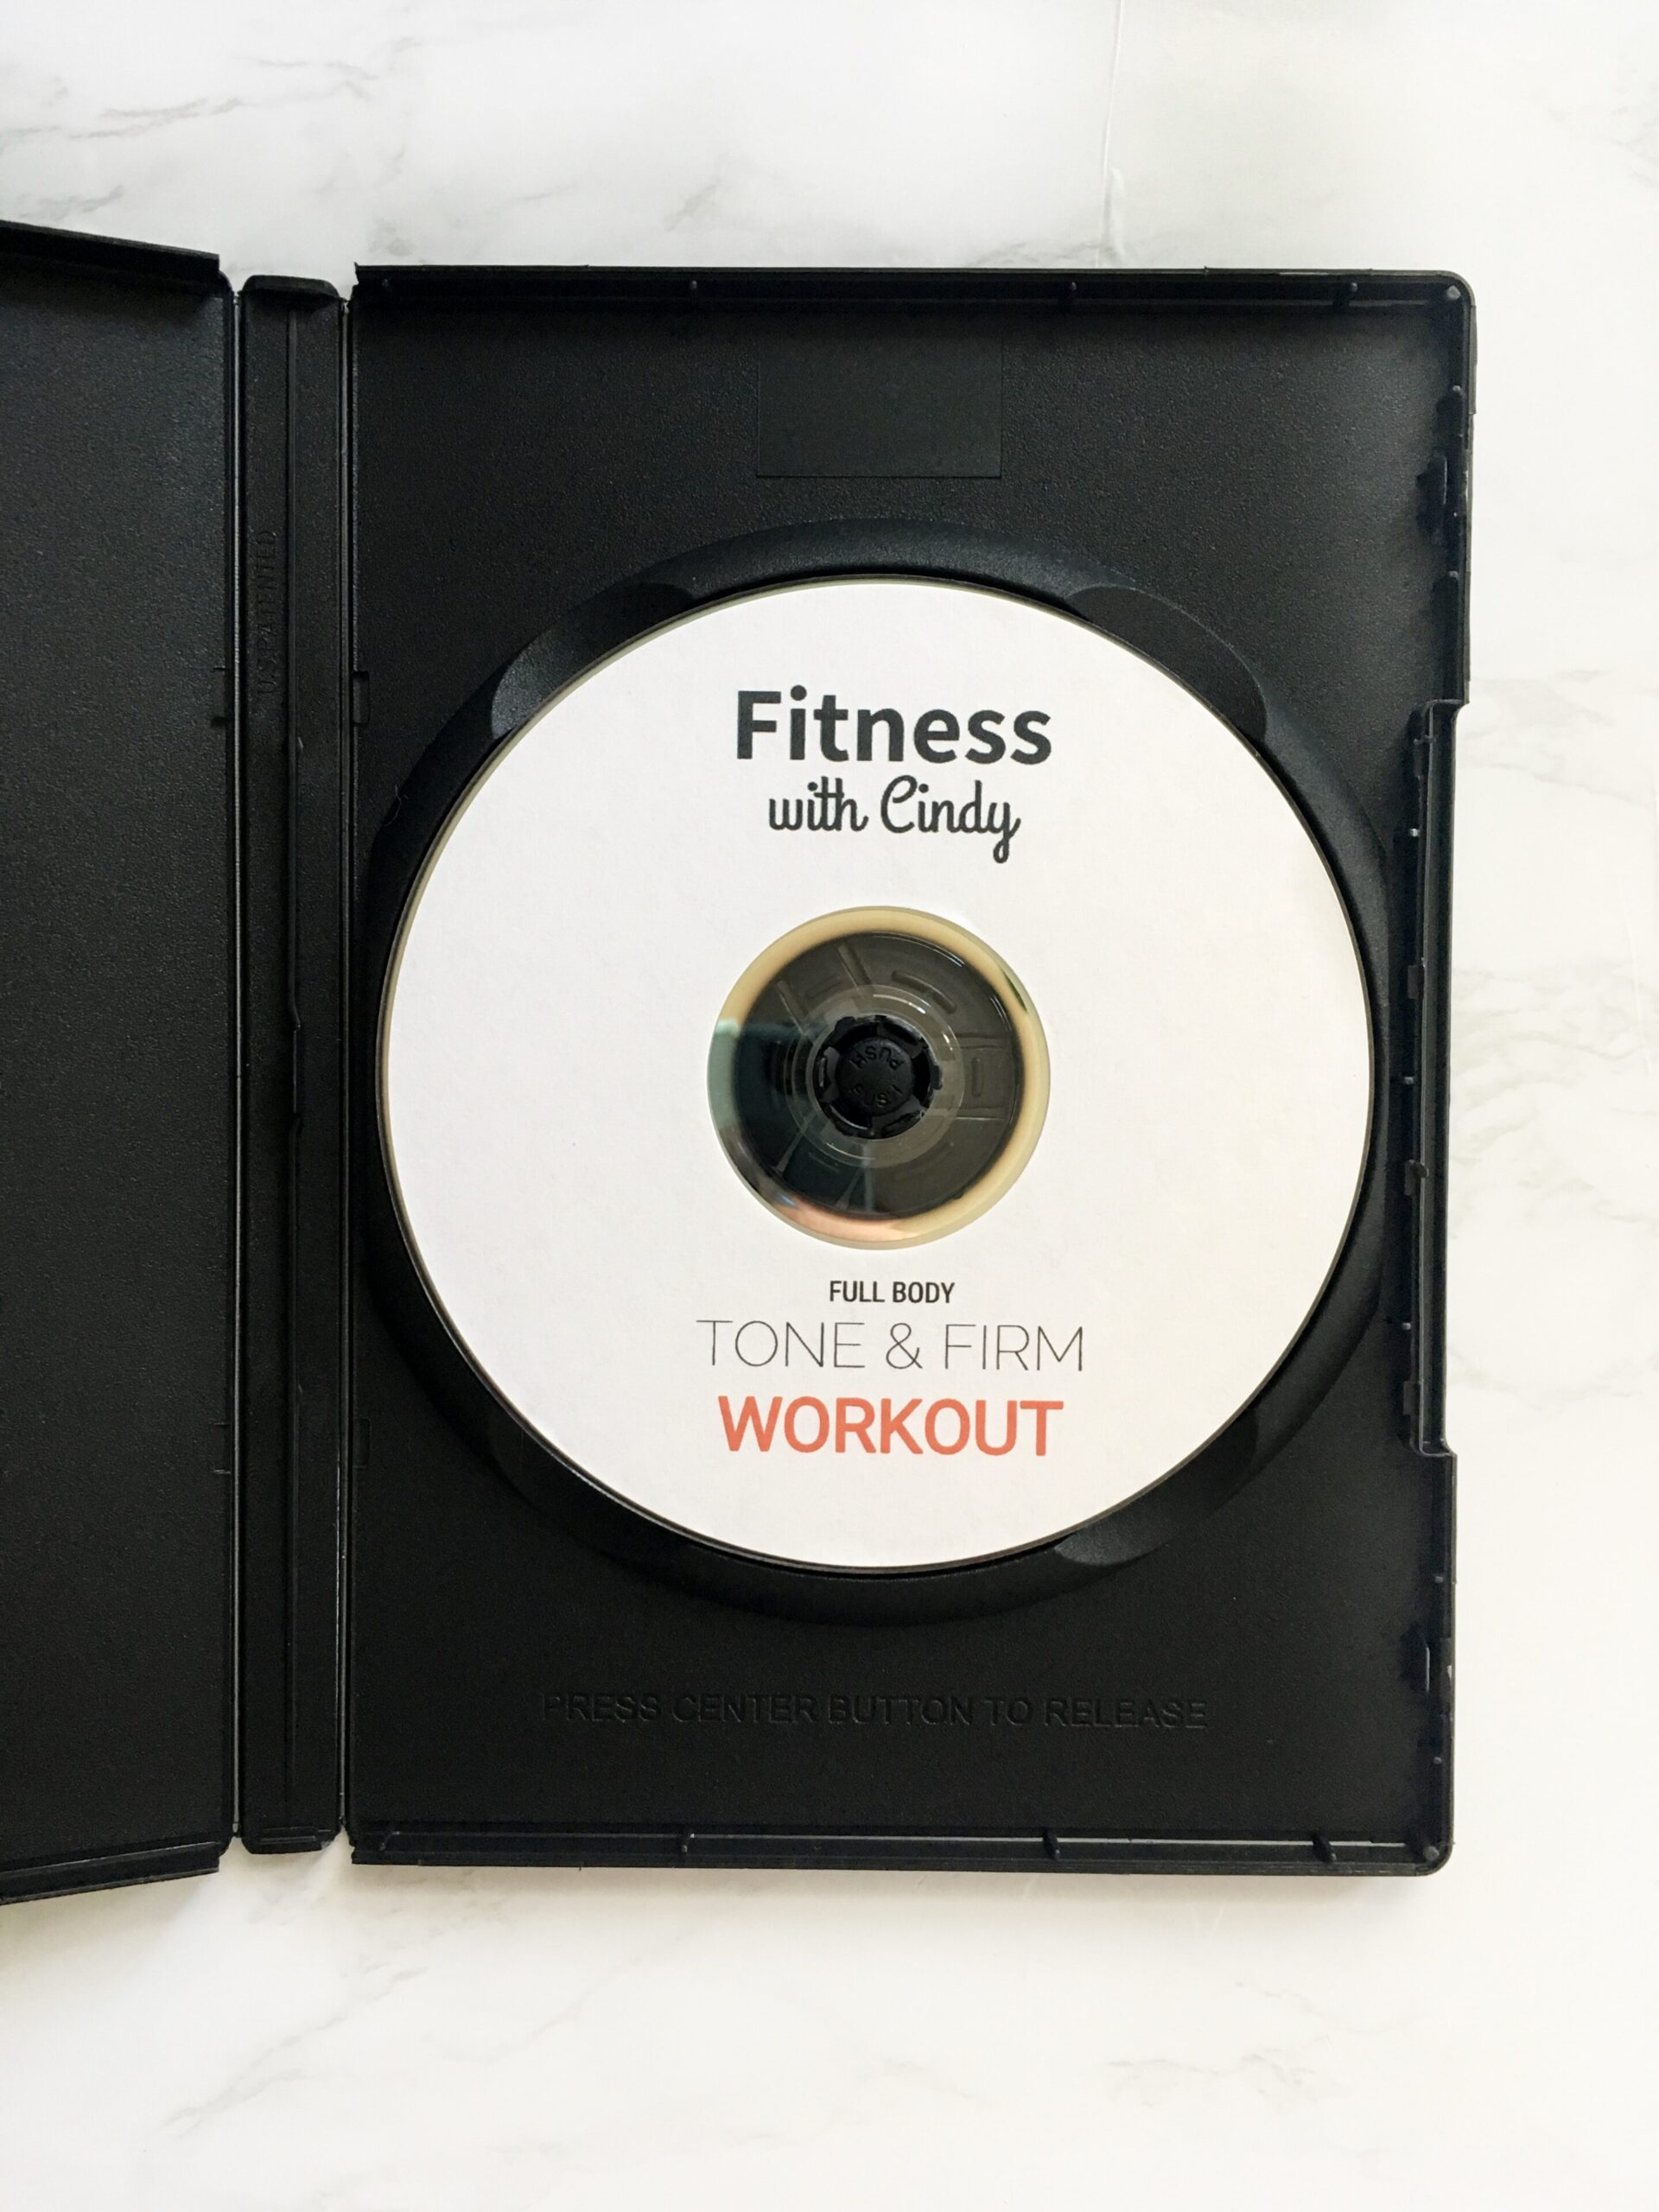 Full Body Workout DVD For Seniors - Fitness With Cindy